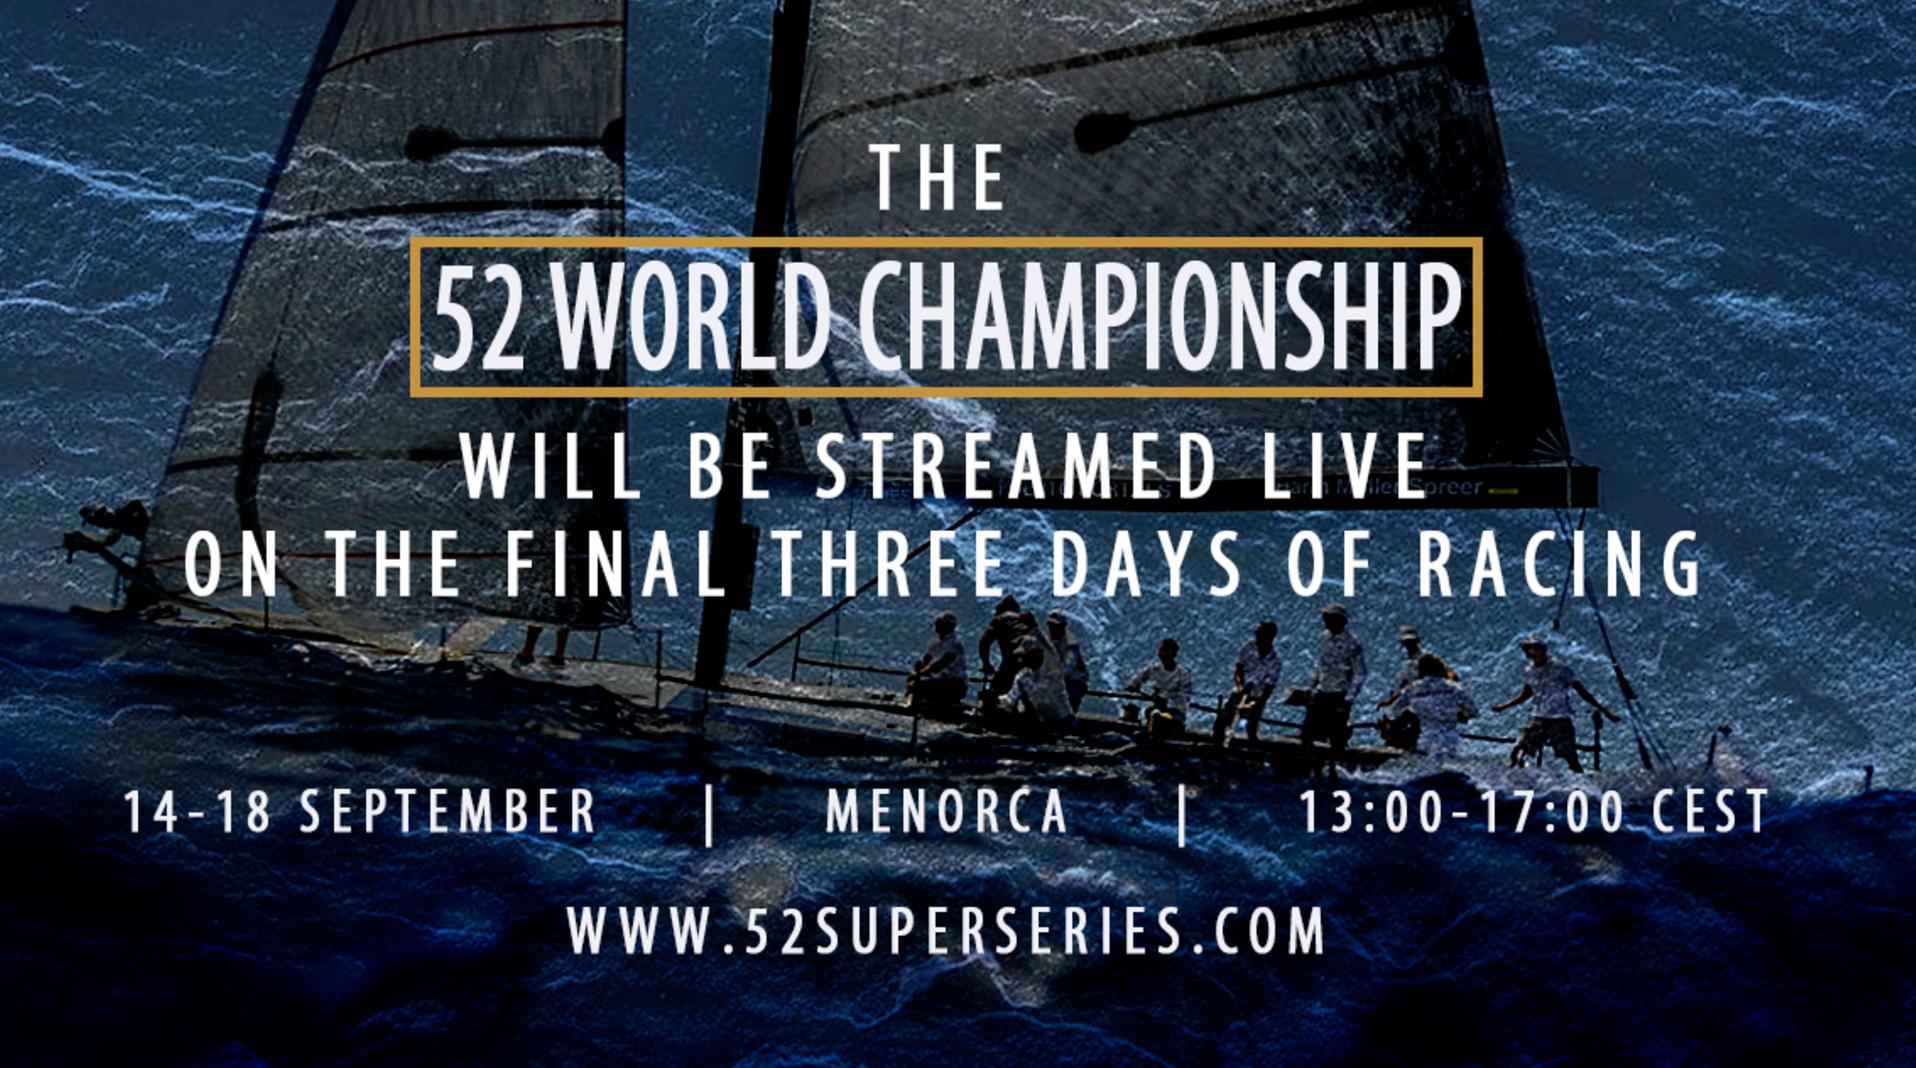 The 52 World Championship will have Live TV